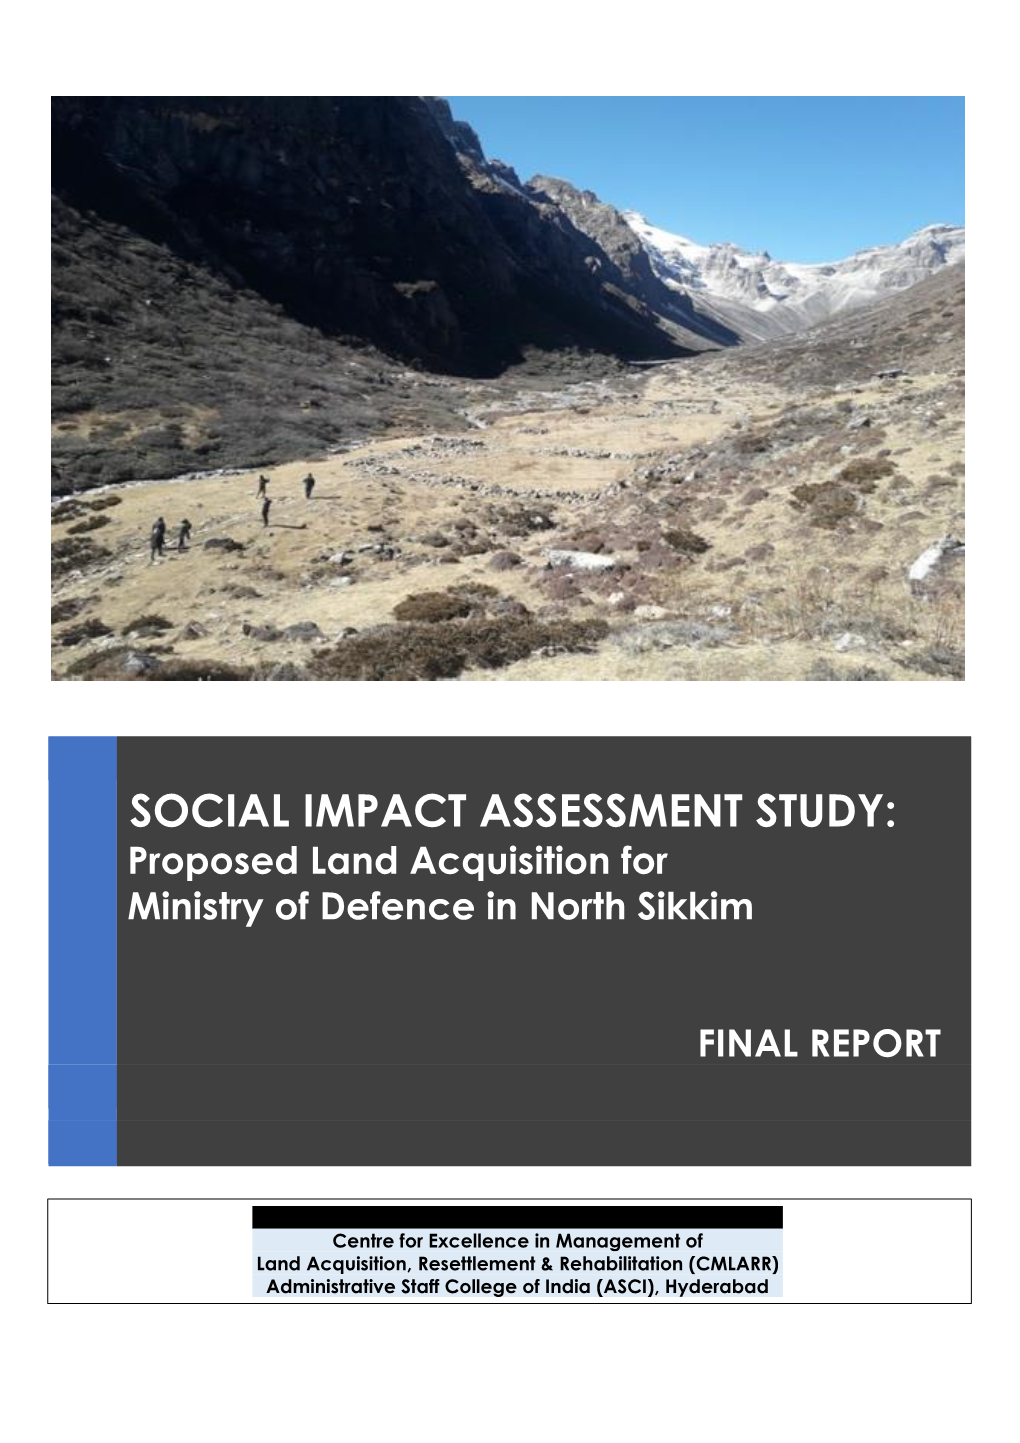 Social Impact Assessment Study of Teesta IV Project